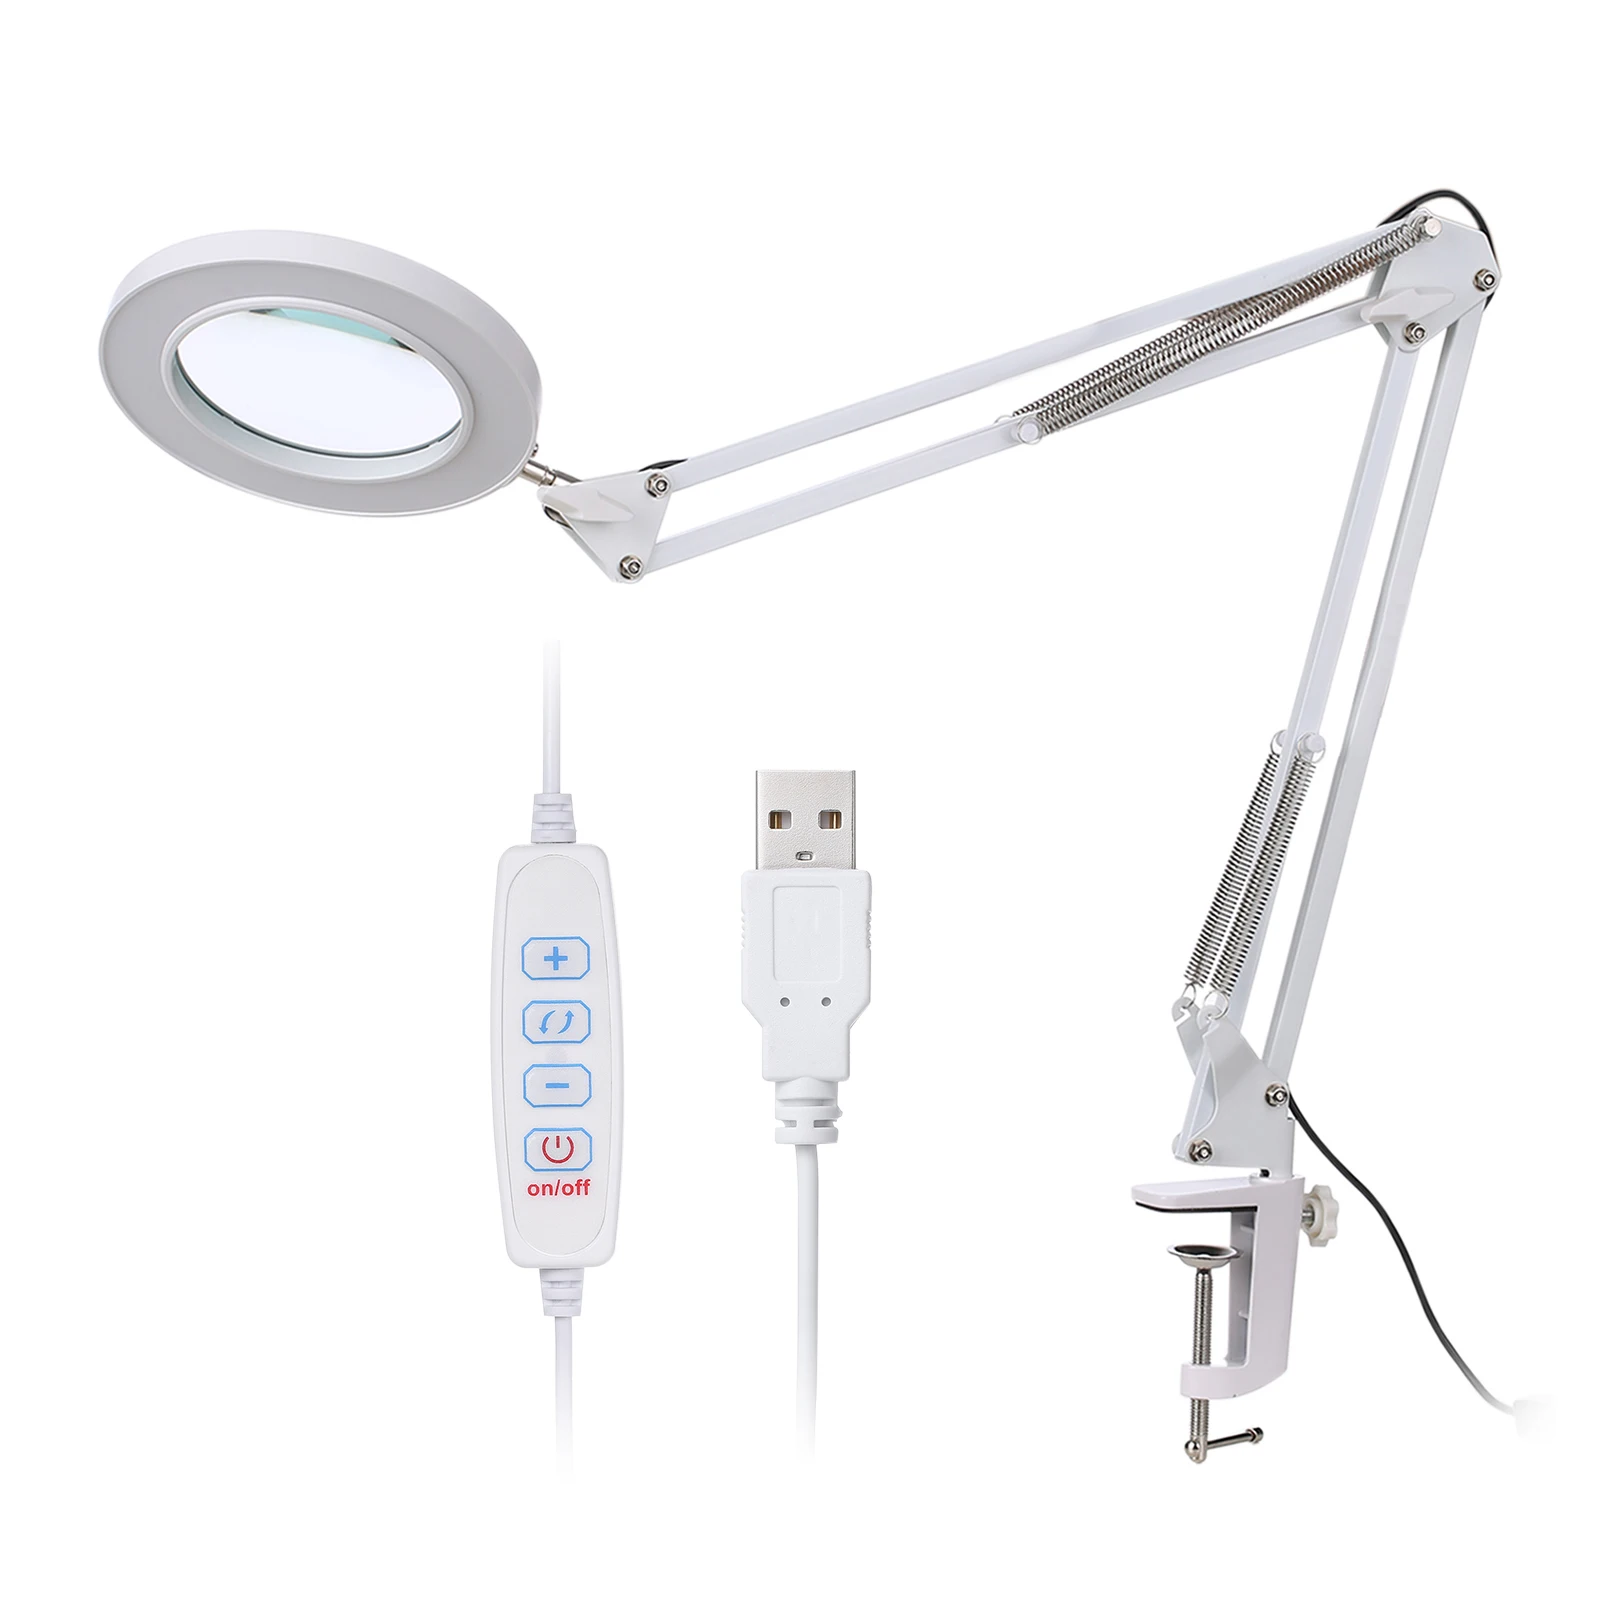 Professional Foldable 8X Magnifying Glass Desk Lamp Magnifier LED Light Reading Lamp with Three Dimming Modes USB Power Supply